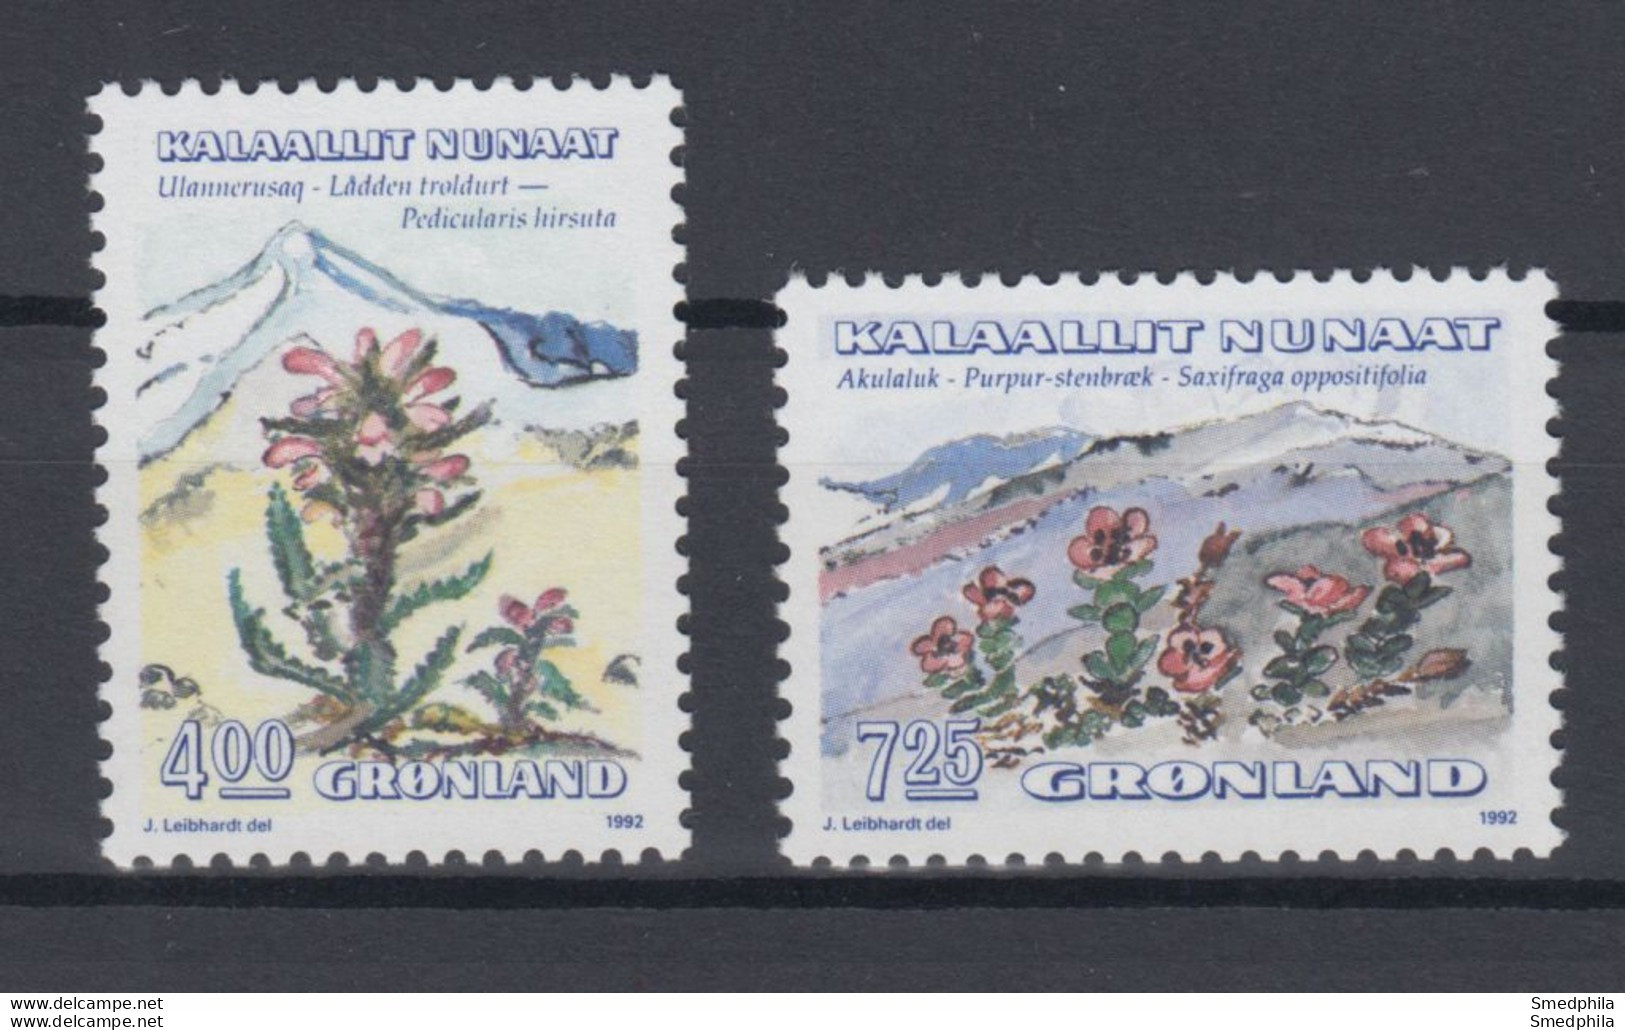 Greenland 1992 - Michel 223-224 MNH ** - Unused Stamps